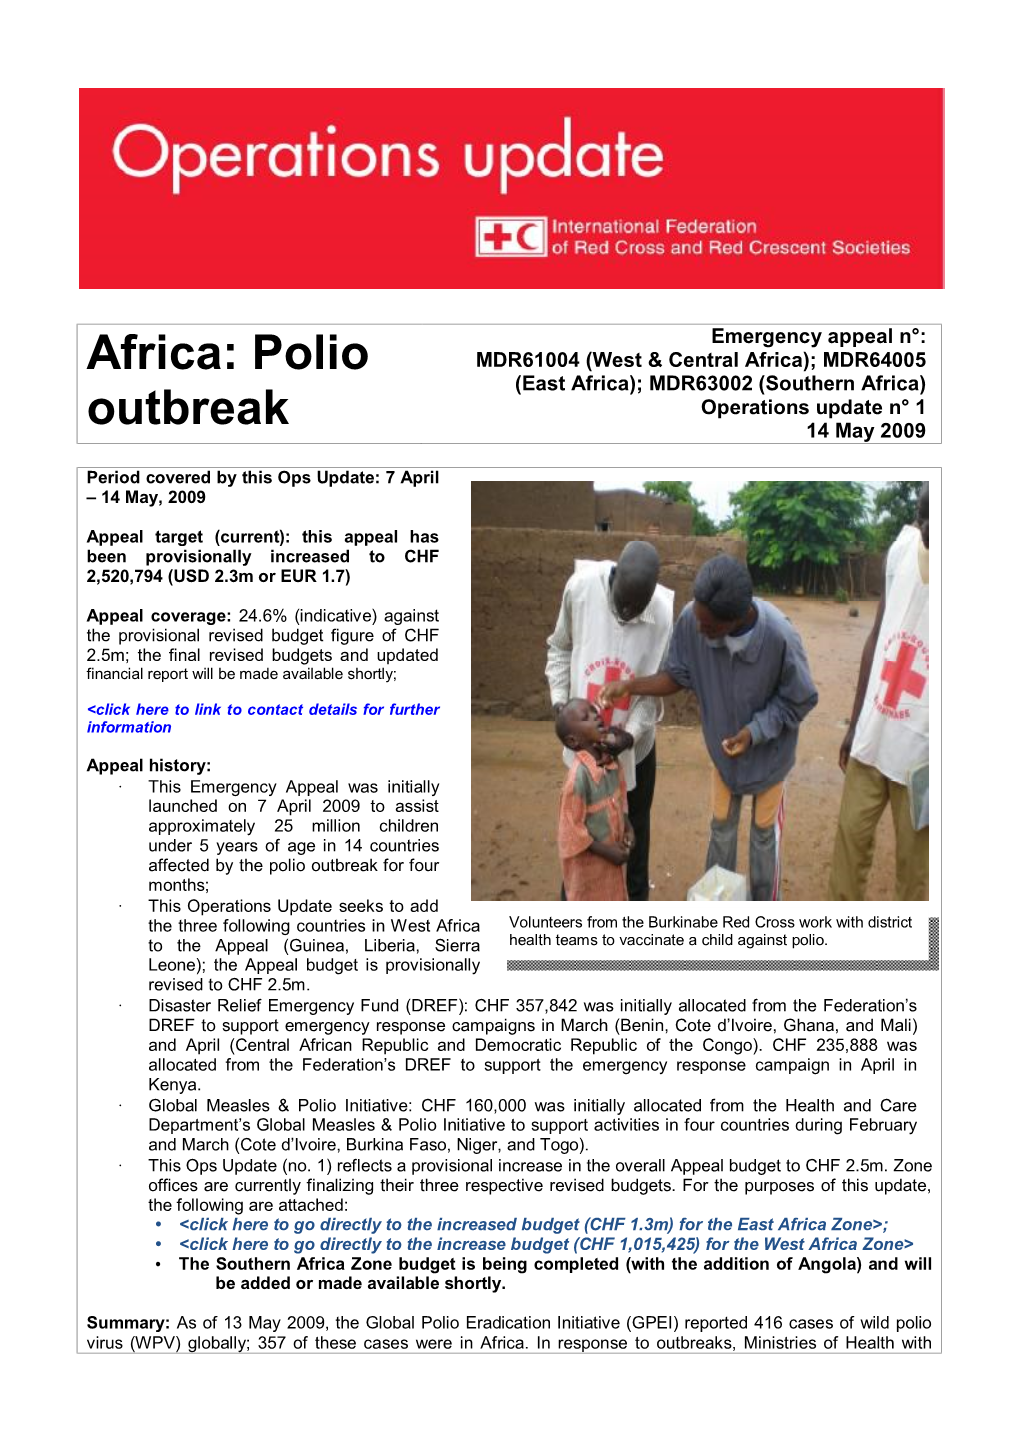 Polio Outbreak for Four Months;